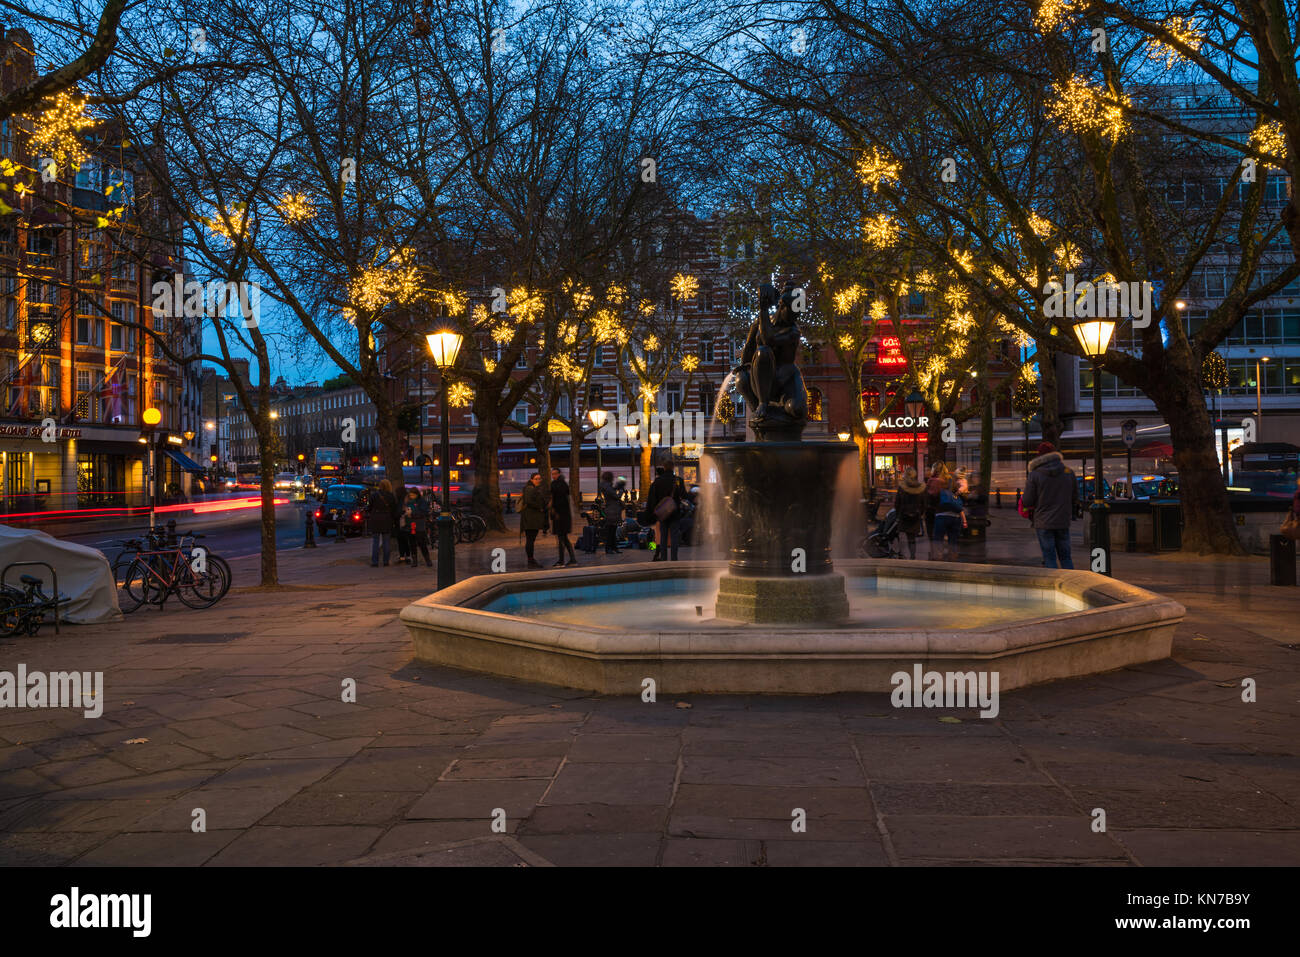 LONDON, UK - DECEMBER 09, 2017: The Venus Fountain and Christmas decorations on Sloane Square. The fountain the centre of the square was designed by s Stock Photo